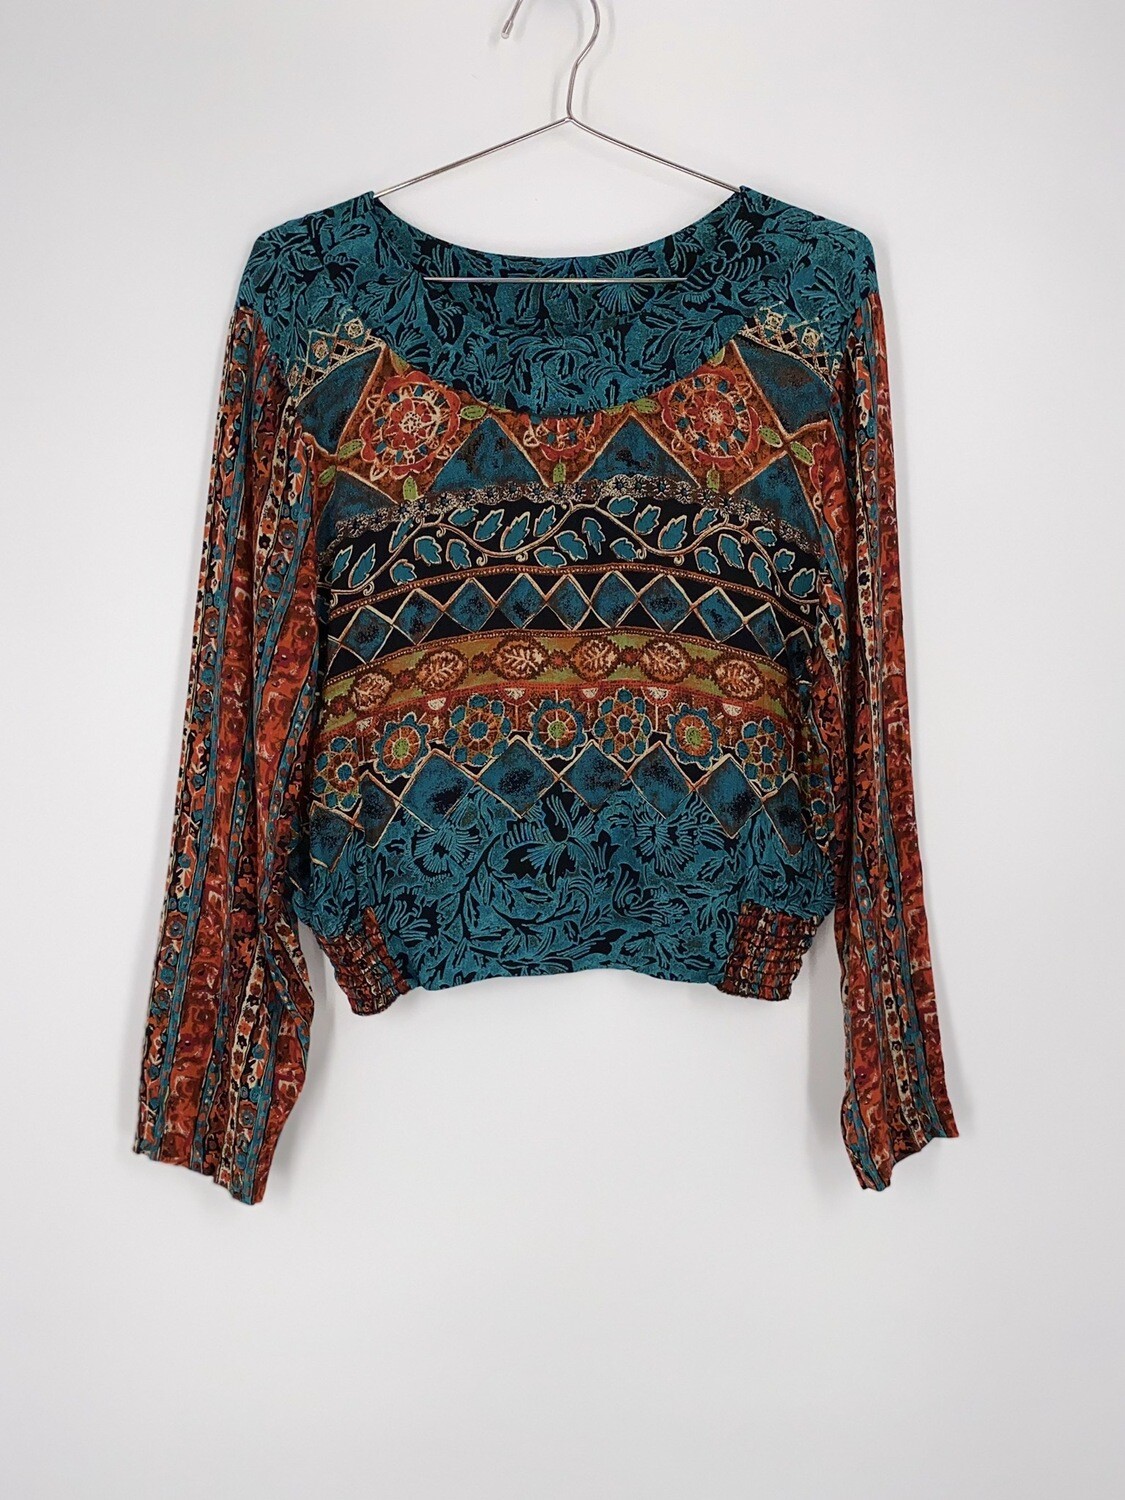 Multi Patterned Long Sleeve Top Size S